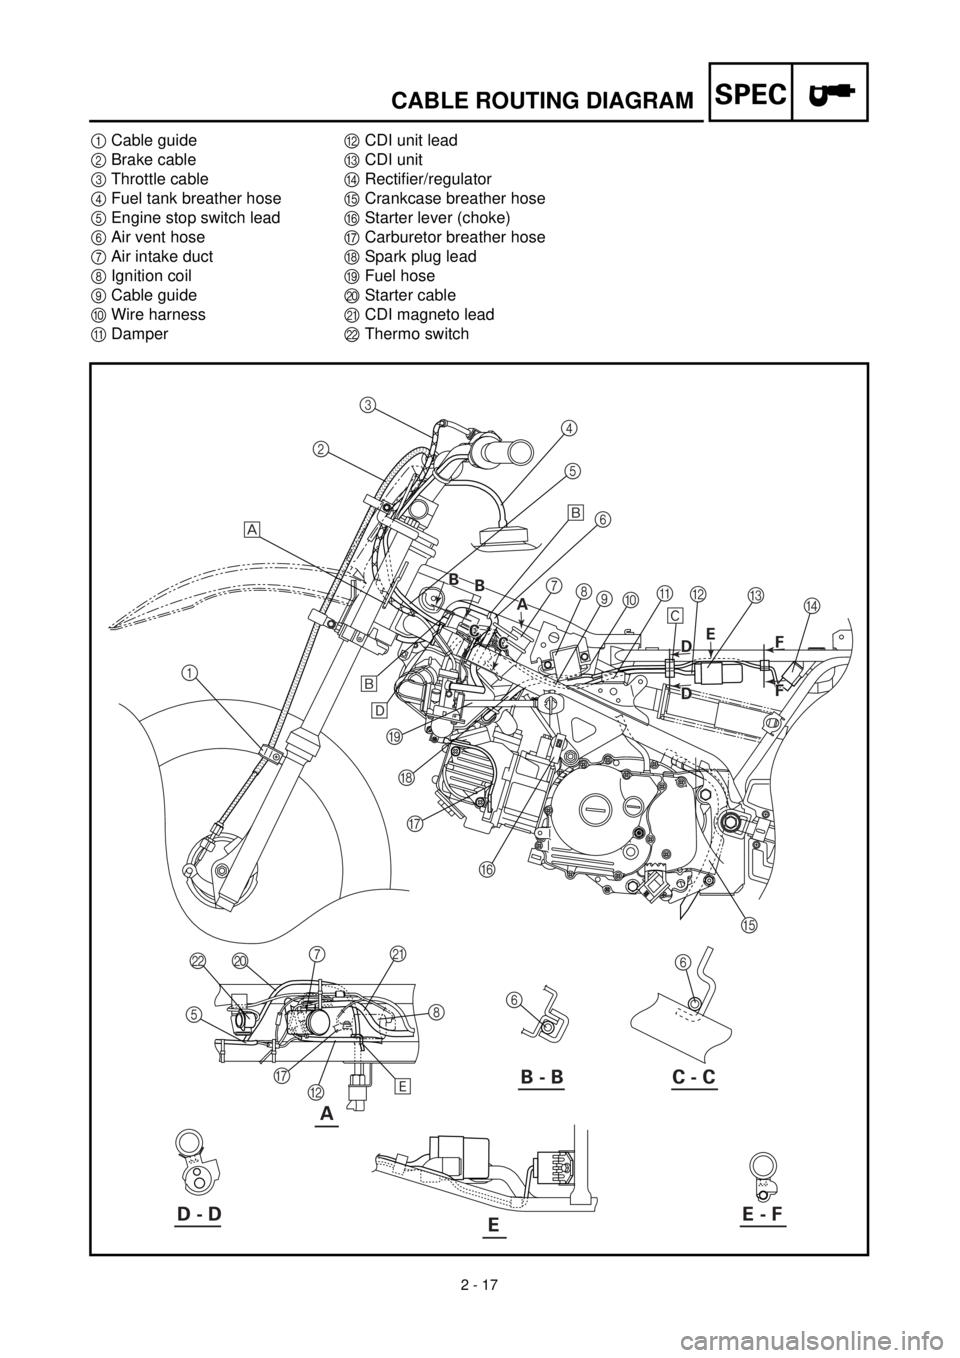 YAMAHA TTR90 2000  Owners Manual  
2 - 17
SPEC
 
CABLE ROUTING DIAGRAM 
1 
Cable guide 
2 
Brake cable 
3 
Throttle cable 
4 
Fuel tank breather hose 
5 
Engine stop switch lead 
6 
Air vent hose 
7 
Air intake duct 
8 
Ignition coil